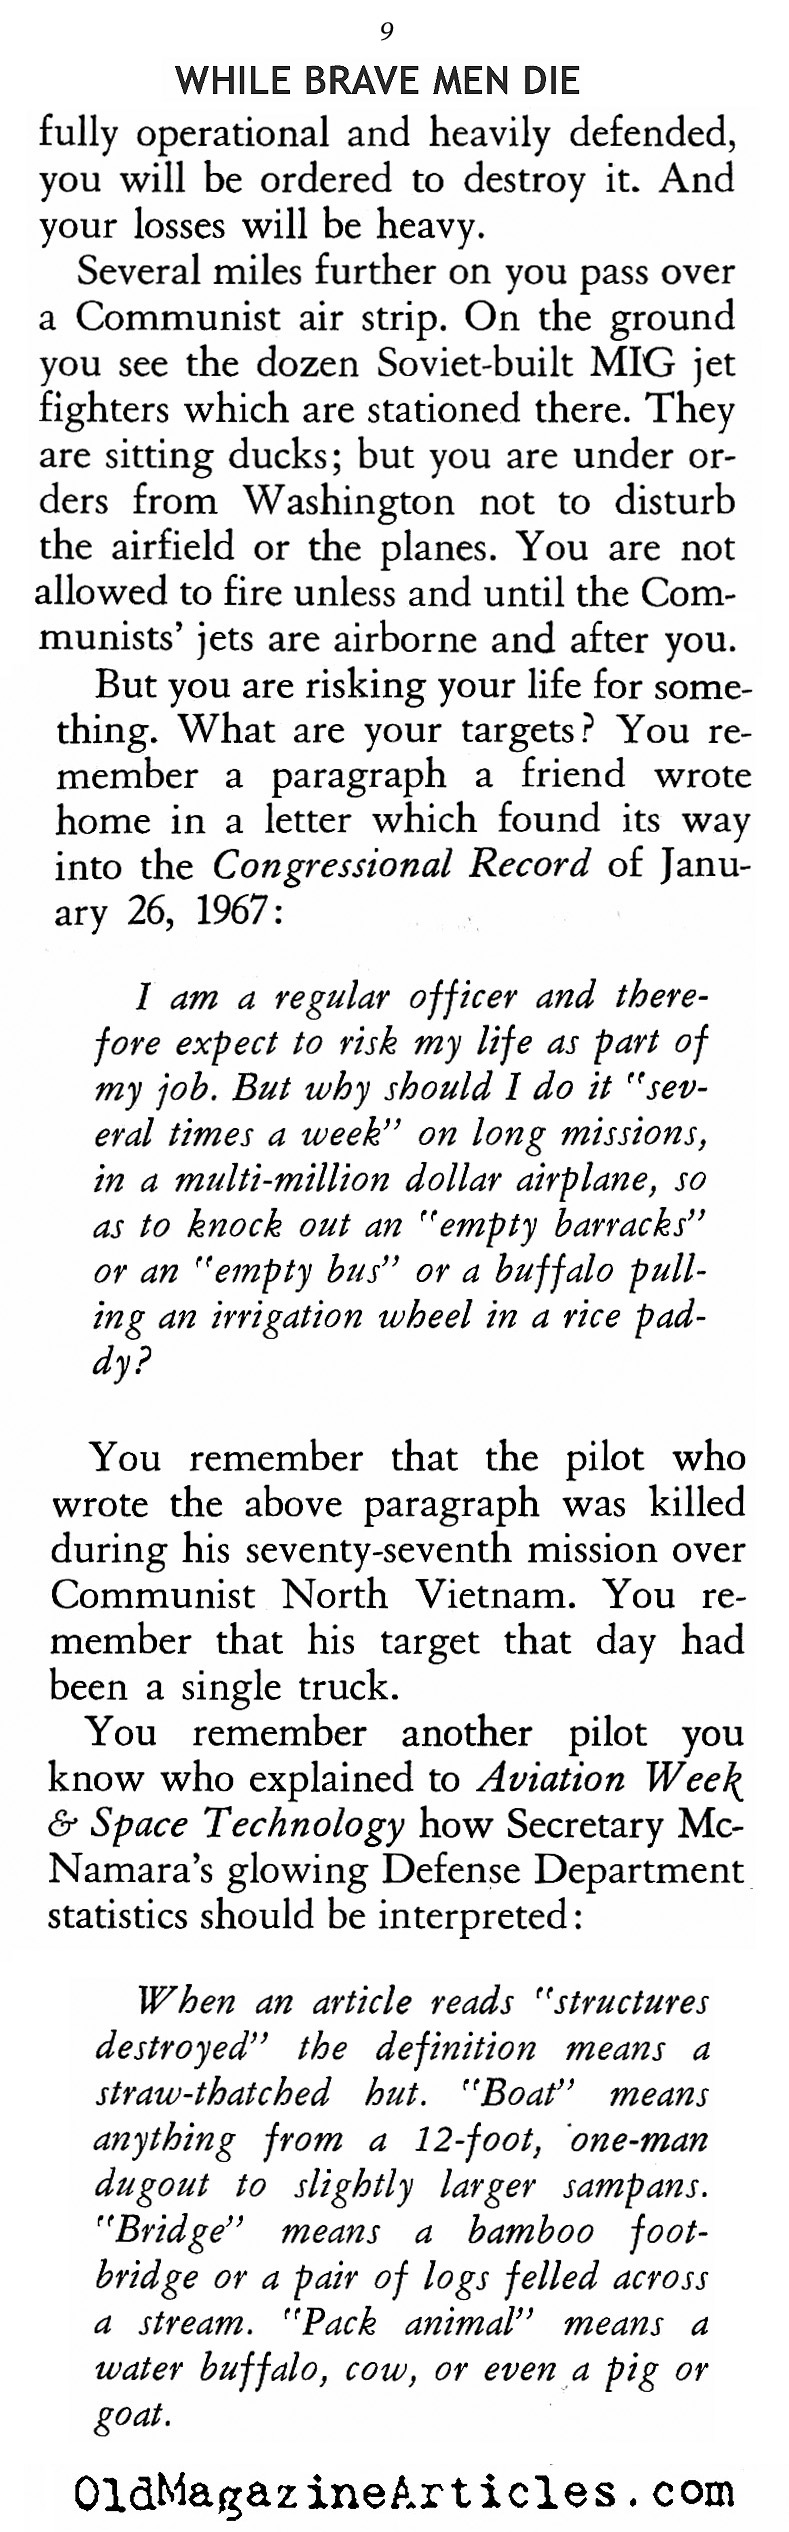 ''While Brave Men Die'' (American Opinion, 1967)